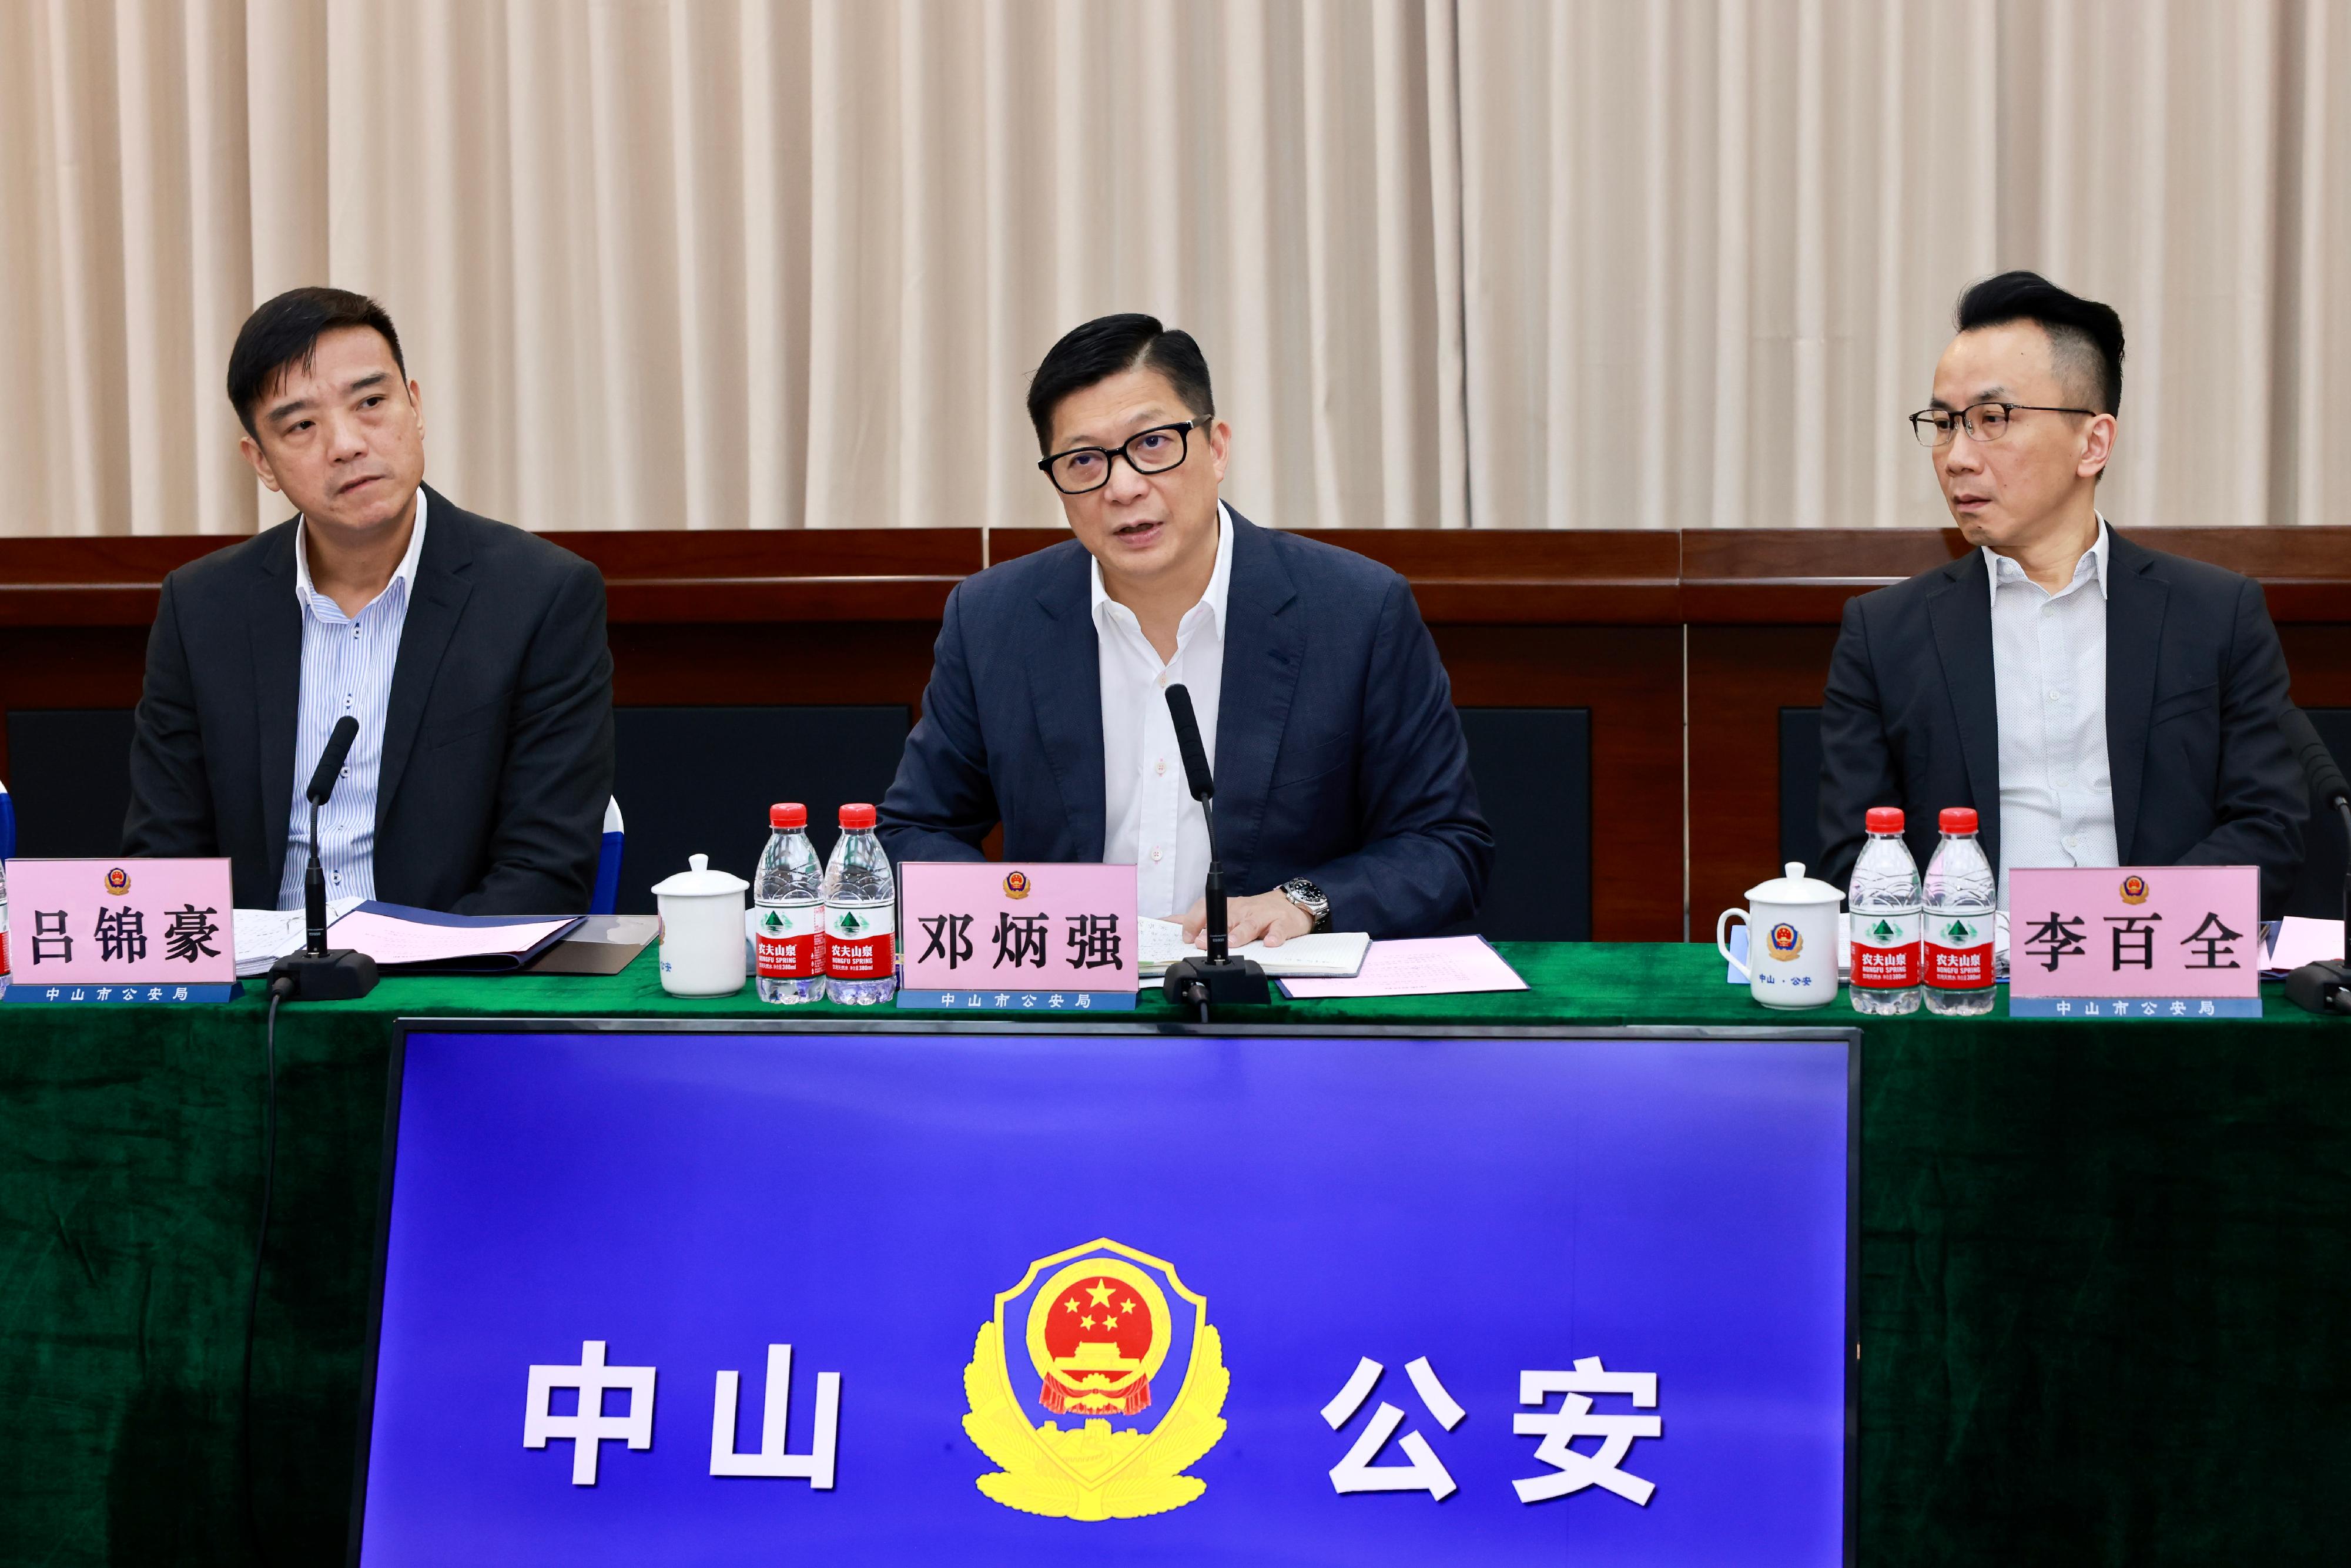 The Secretary for Security, Mr Tang Ping-keung, today (July 20) completed his series of visits to all cities of the Guangdong-Hong Kong-Macao Greater Bay Area in recent months. Photo shows Mr Tang (centre) calling on the Zhongshan Municipal Public Security Bureau.